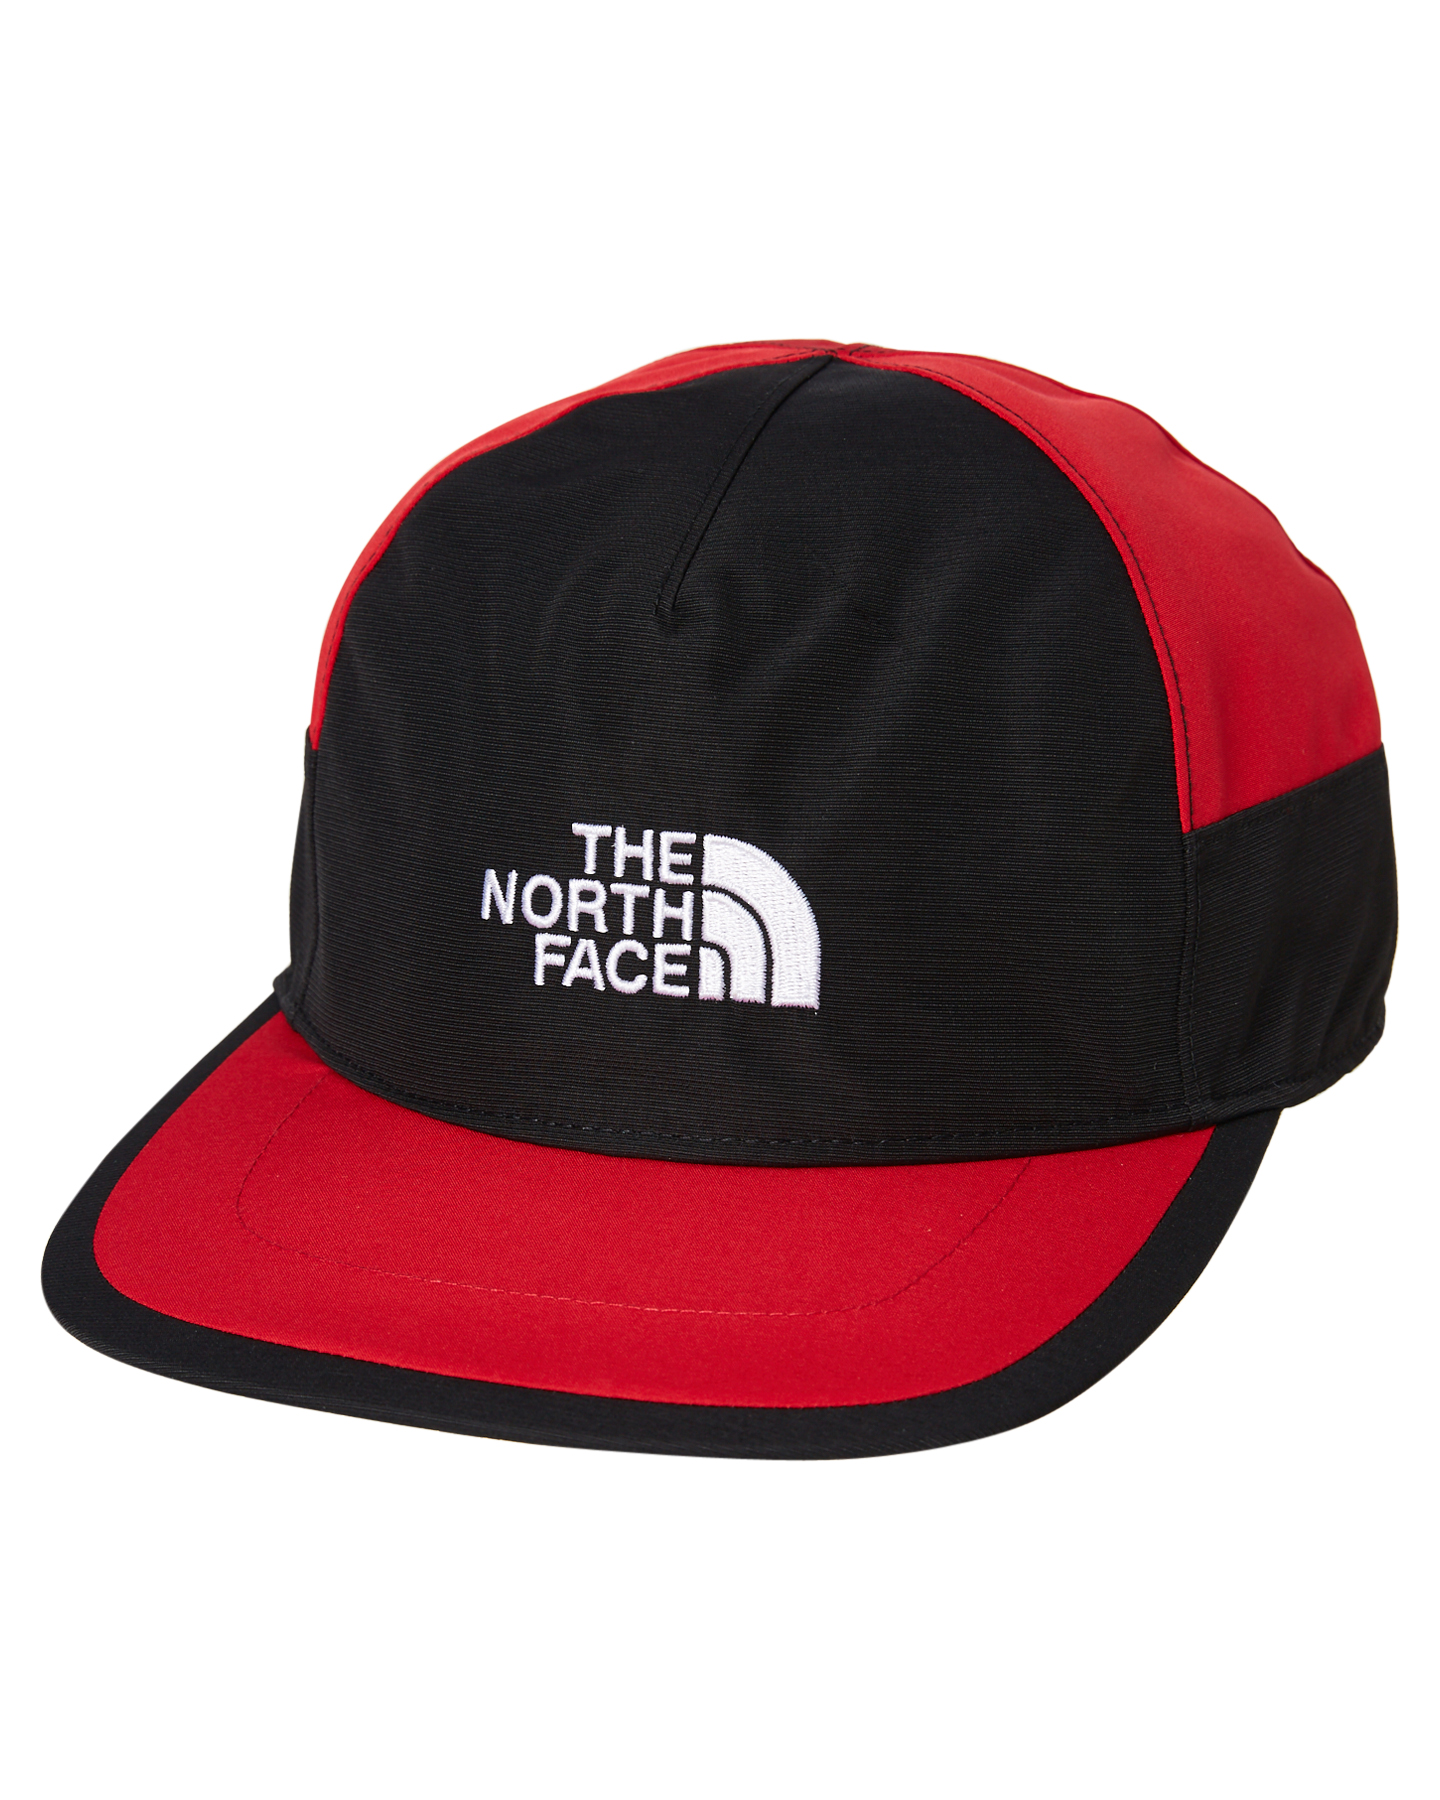 The North Face Gore-Tex Mountain Cap - Tnf Red | SurfStitch